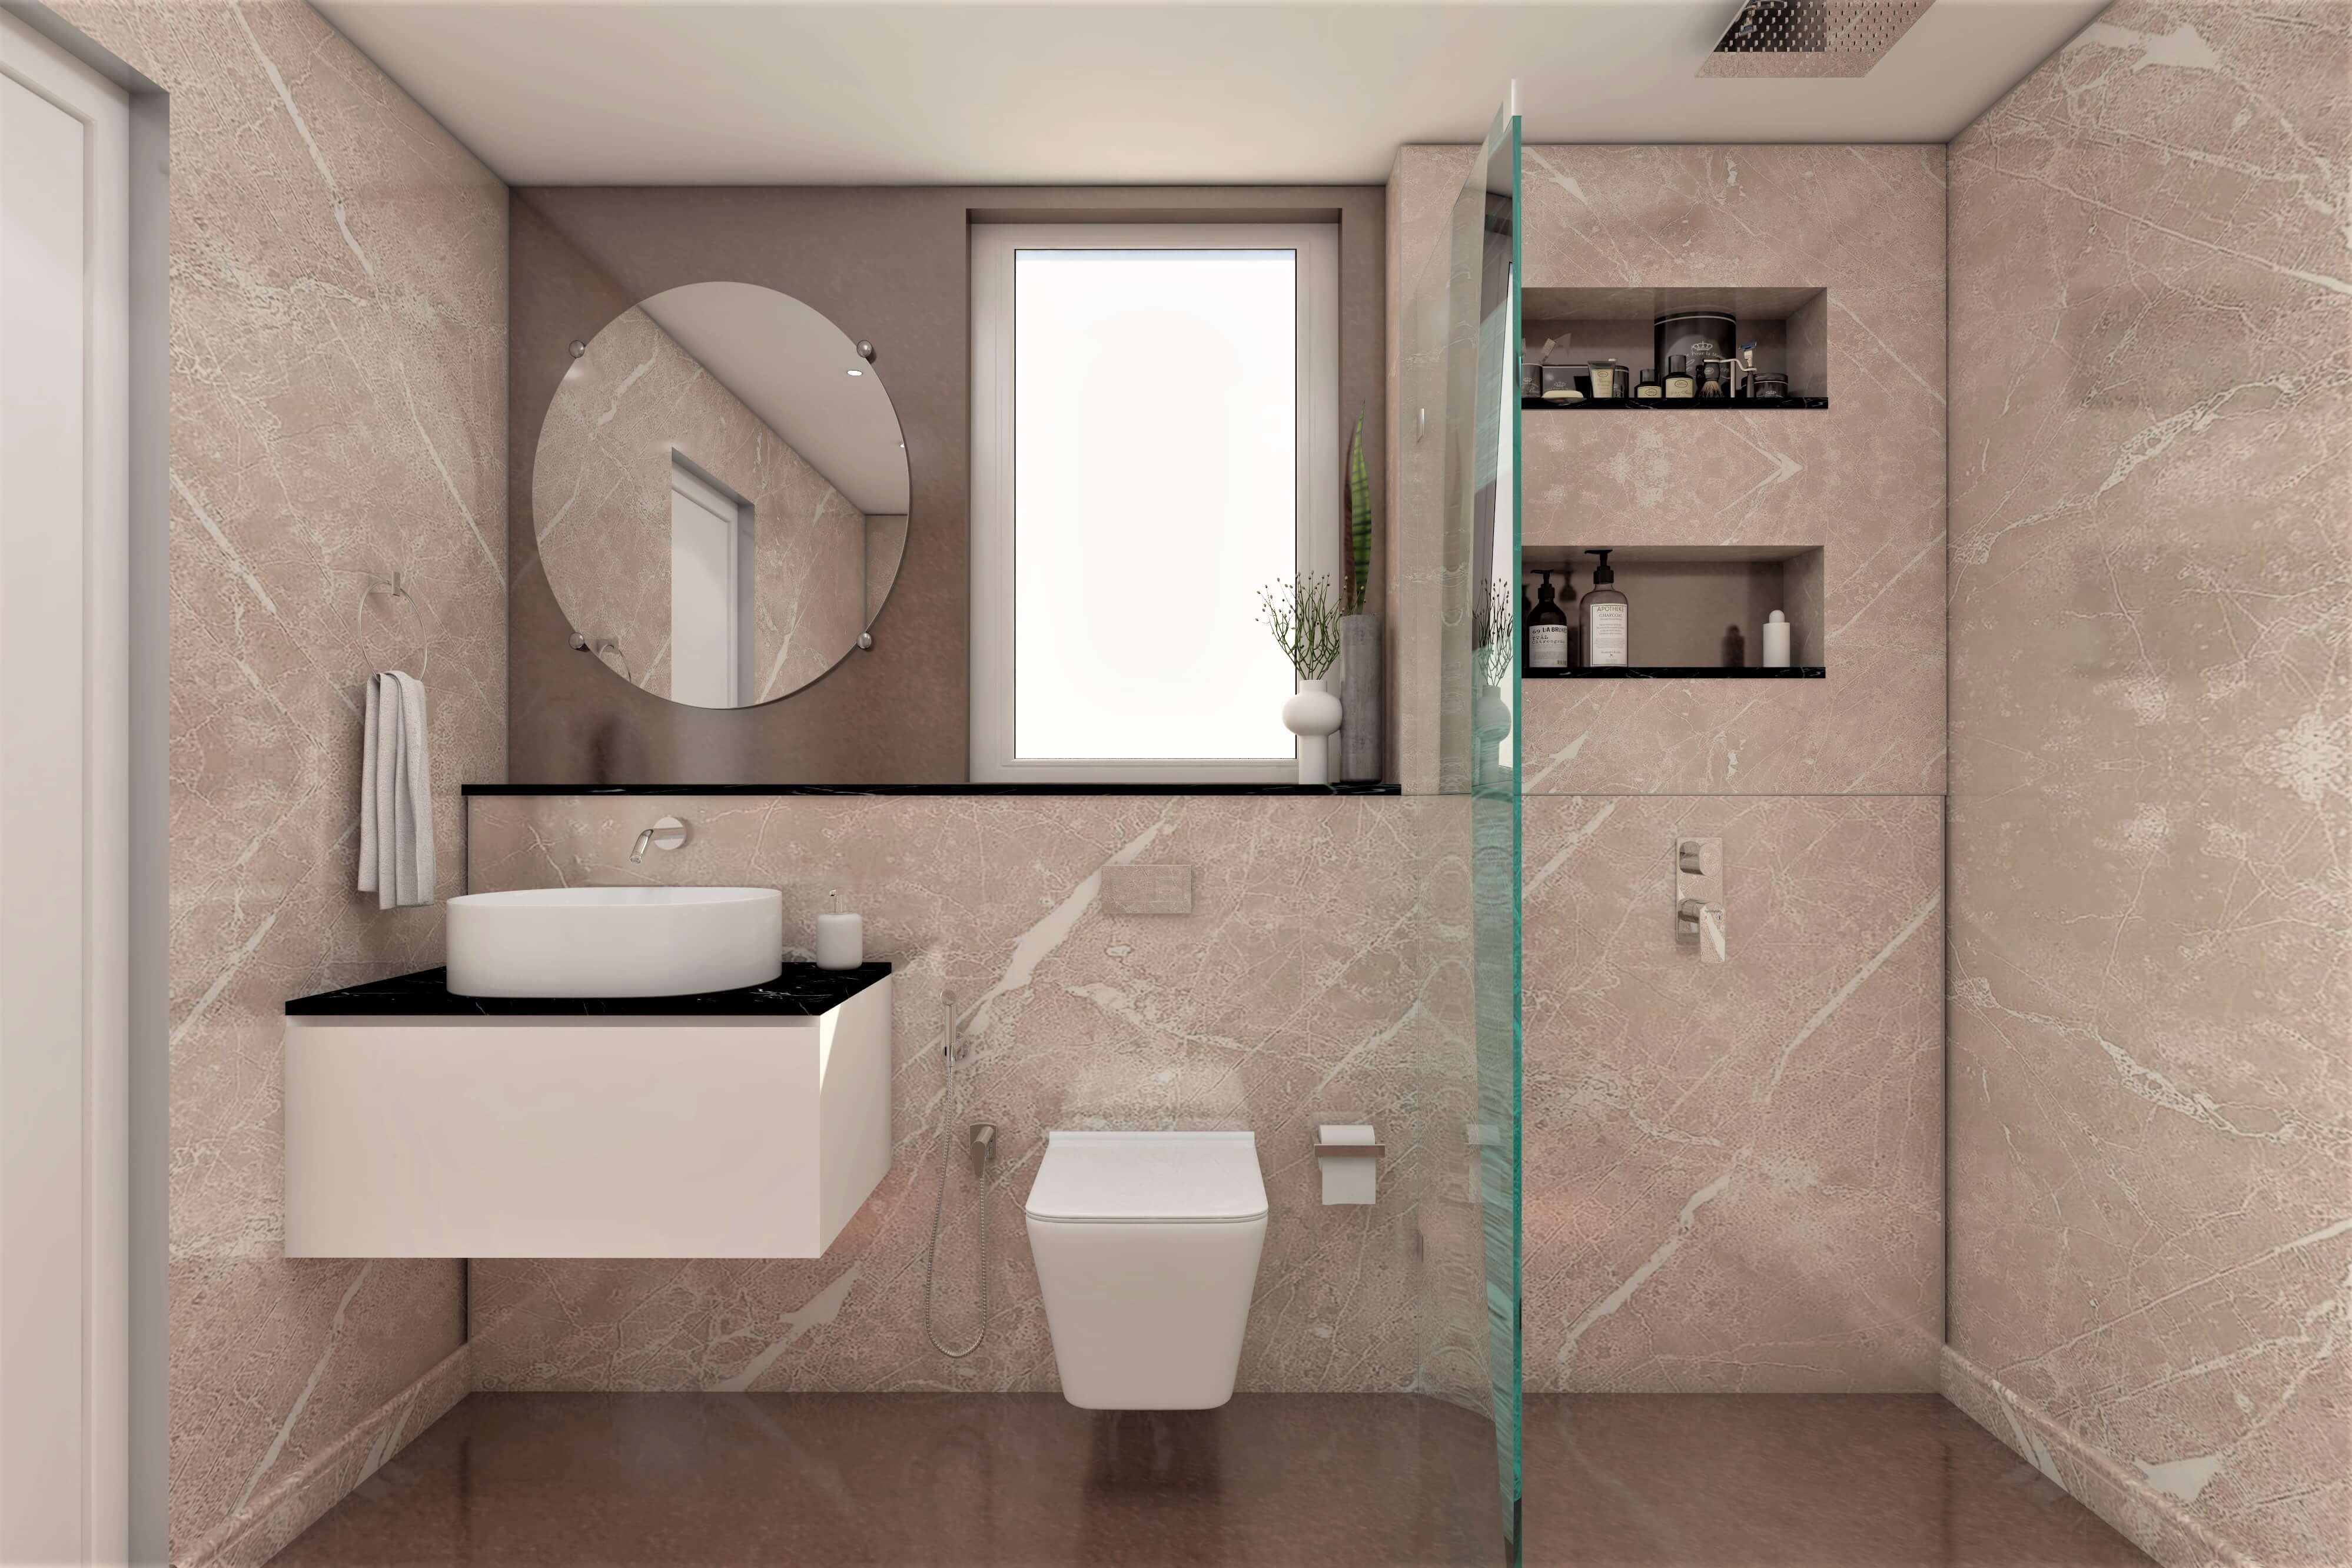 Compact bathroom with light-colored tiles - Beautiful Homes